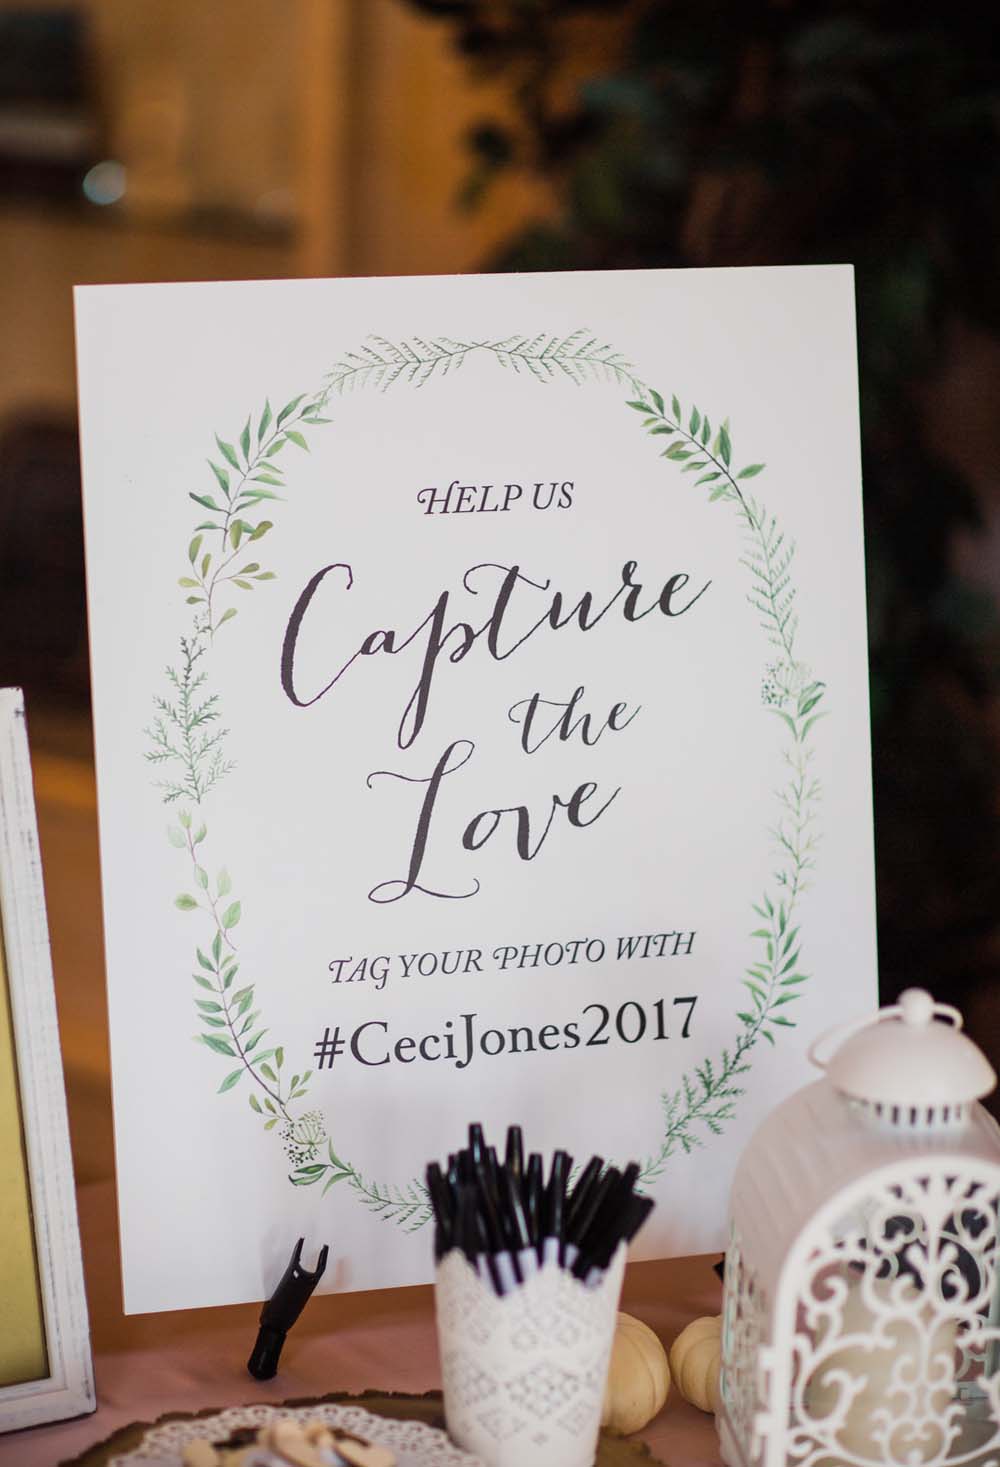 A Rustic, Whimsical Wedding in Tottenham - Reception signage